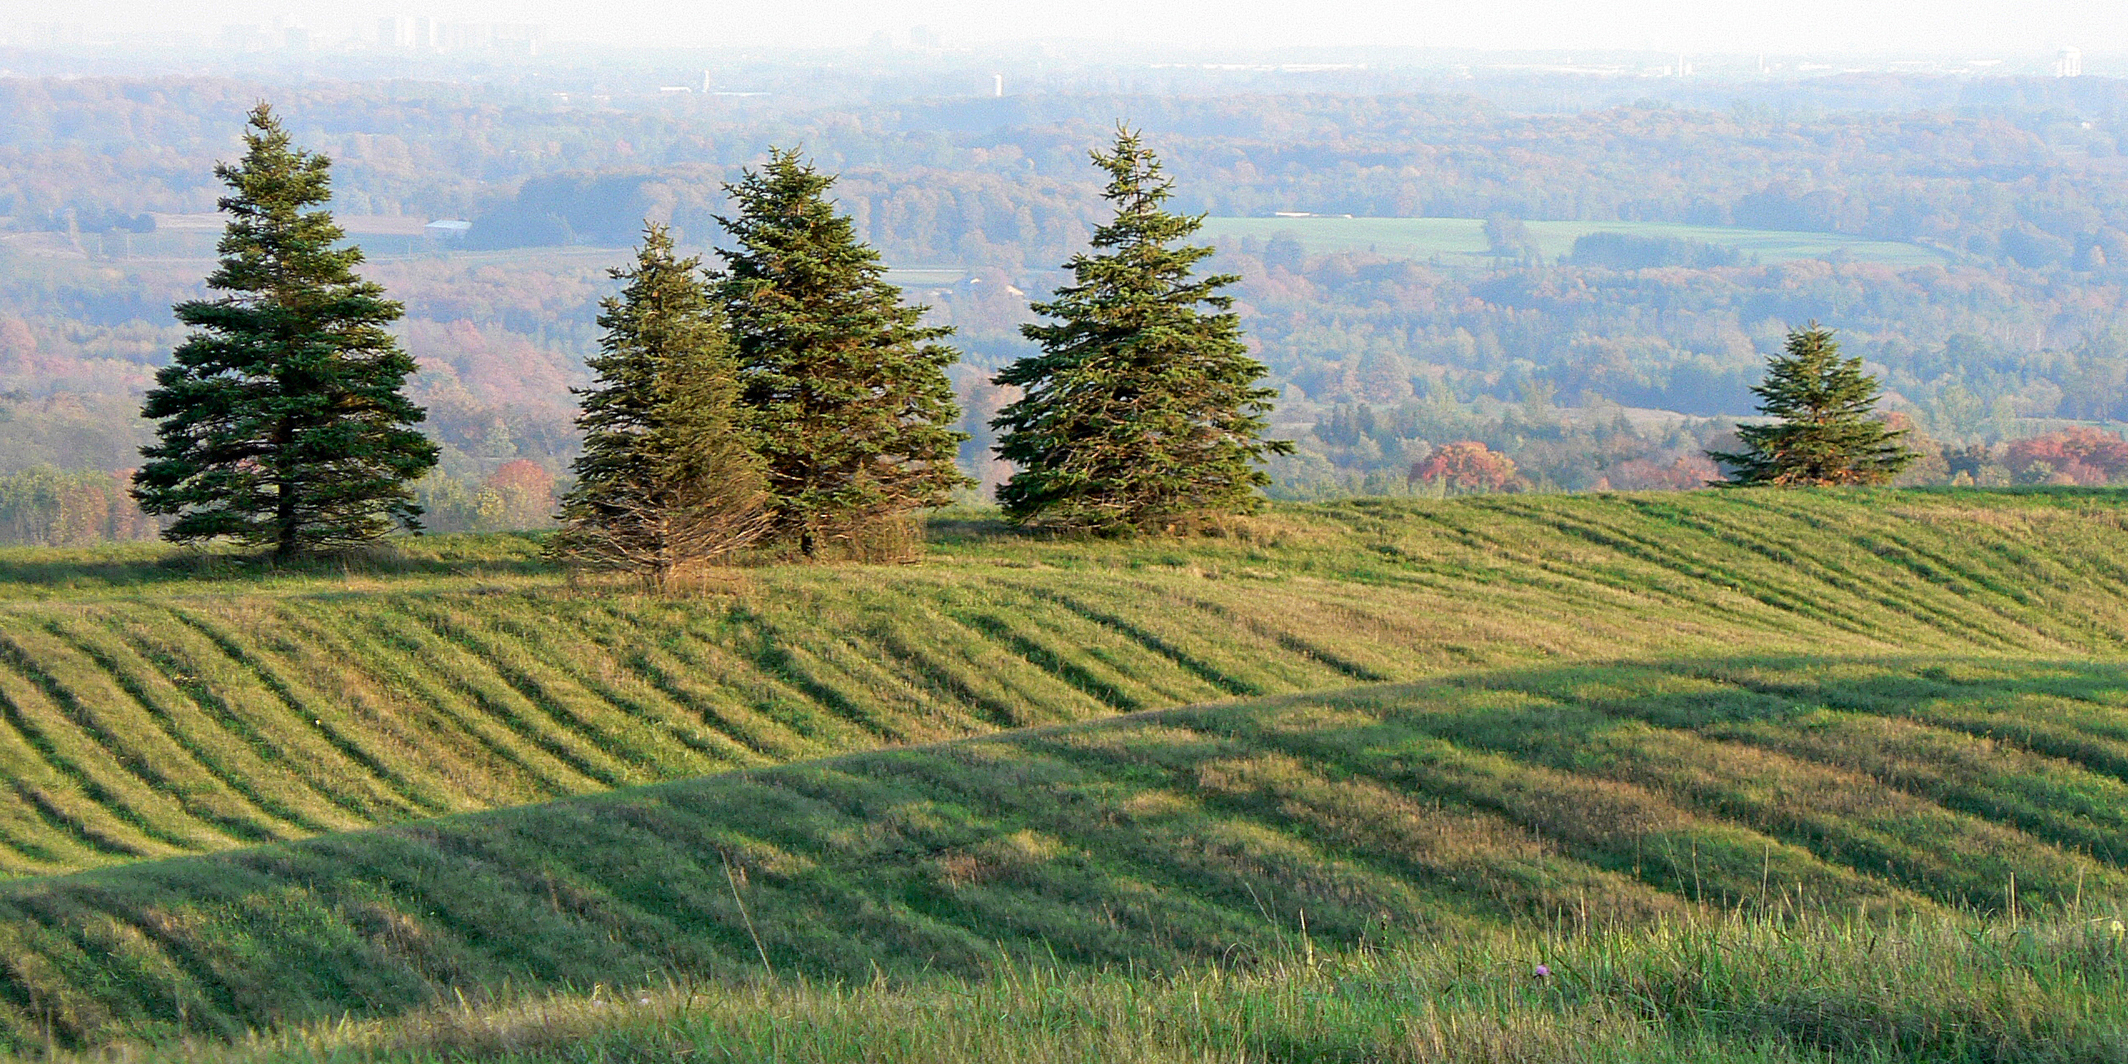 Scenic view looking towards a city from the Oak Ridges Moraine